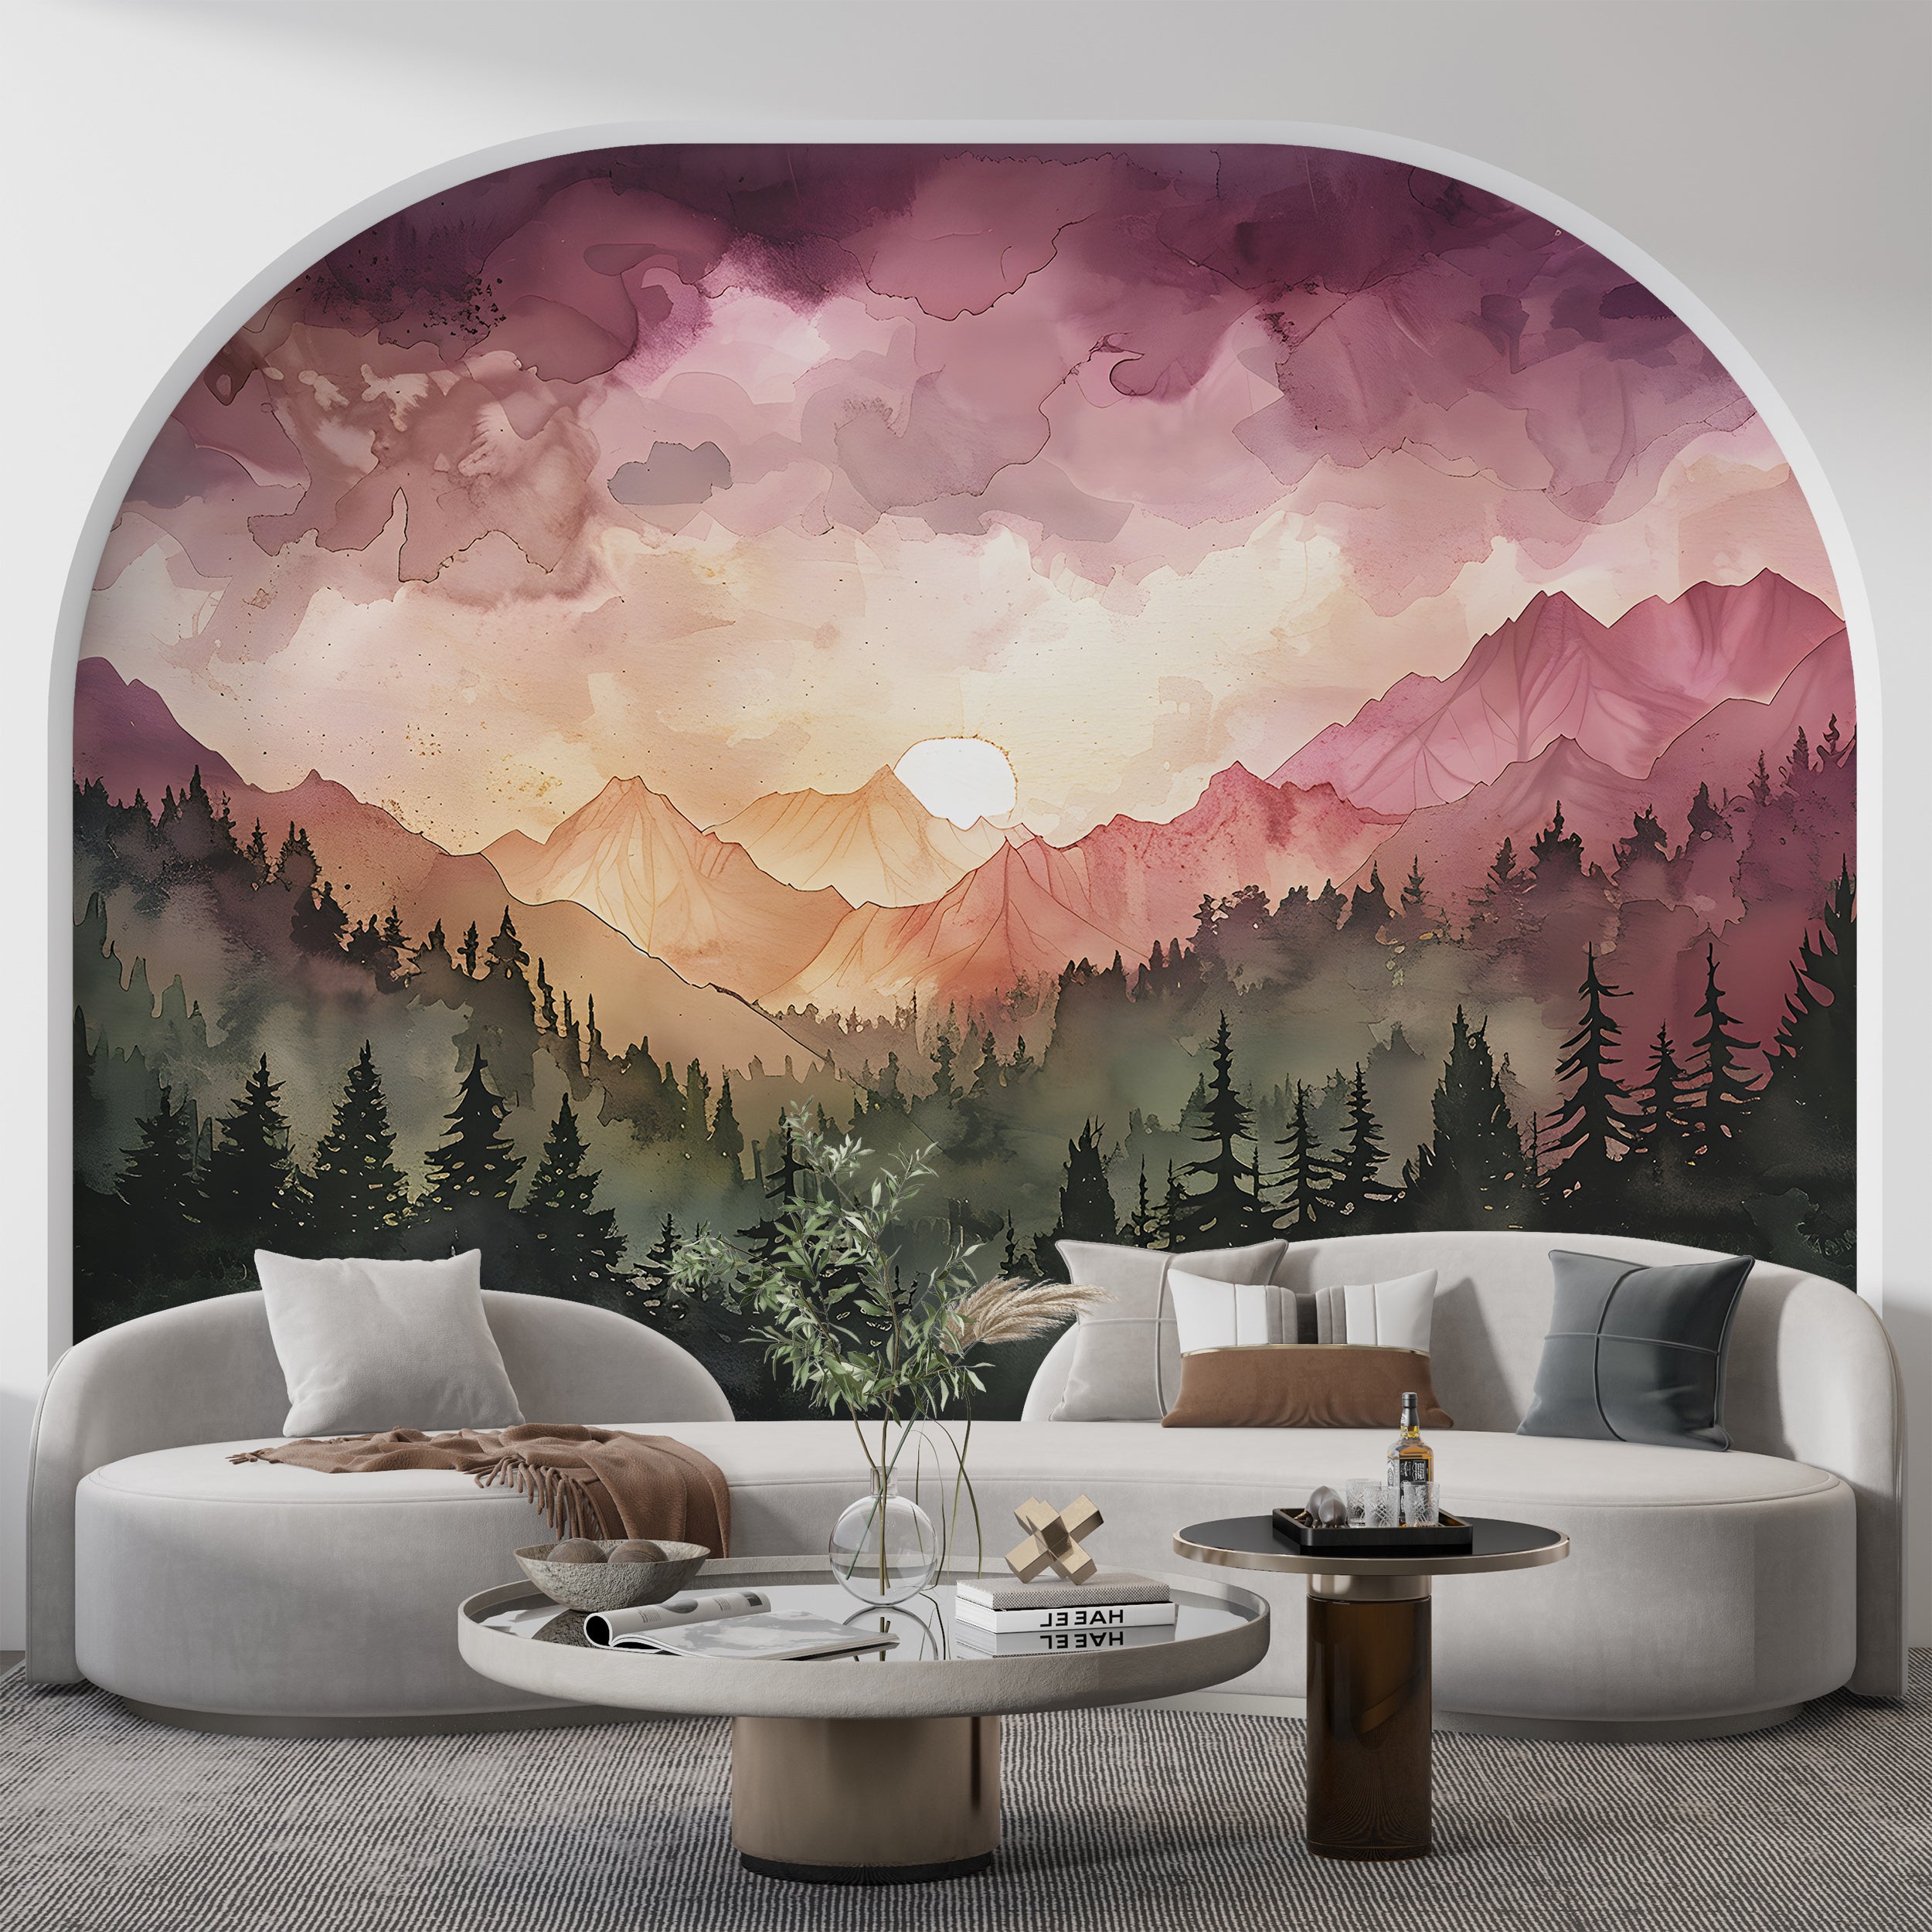 Pink and Orange Mountain Sunset Mural, Watercolor Mountains and Forest Landscape Wallpaper, Colorful Nursery Nature Wall Art